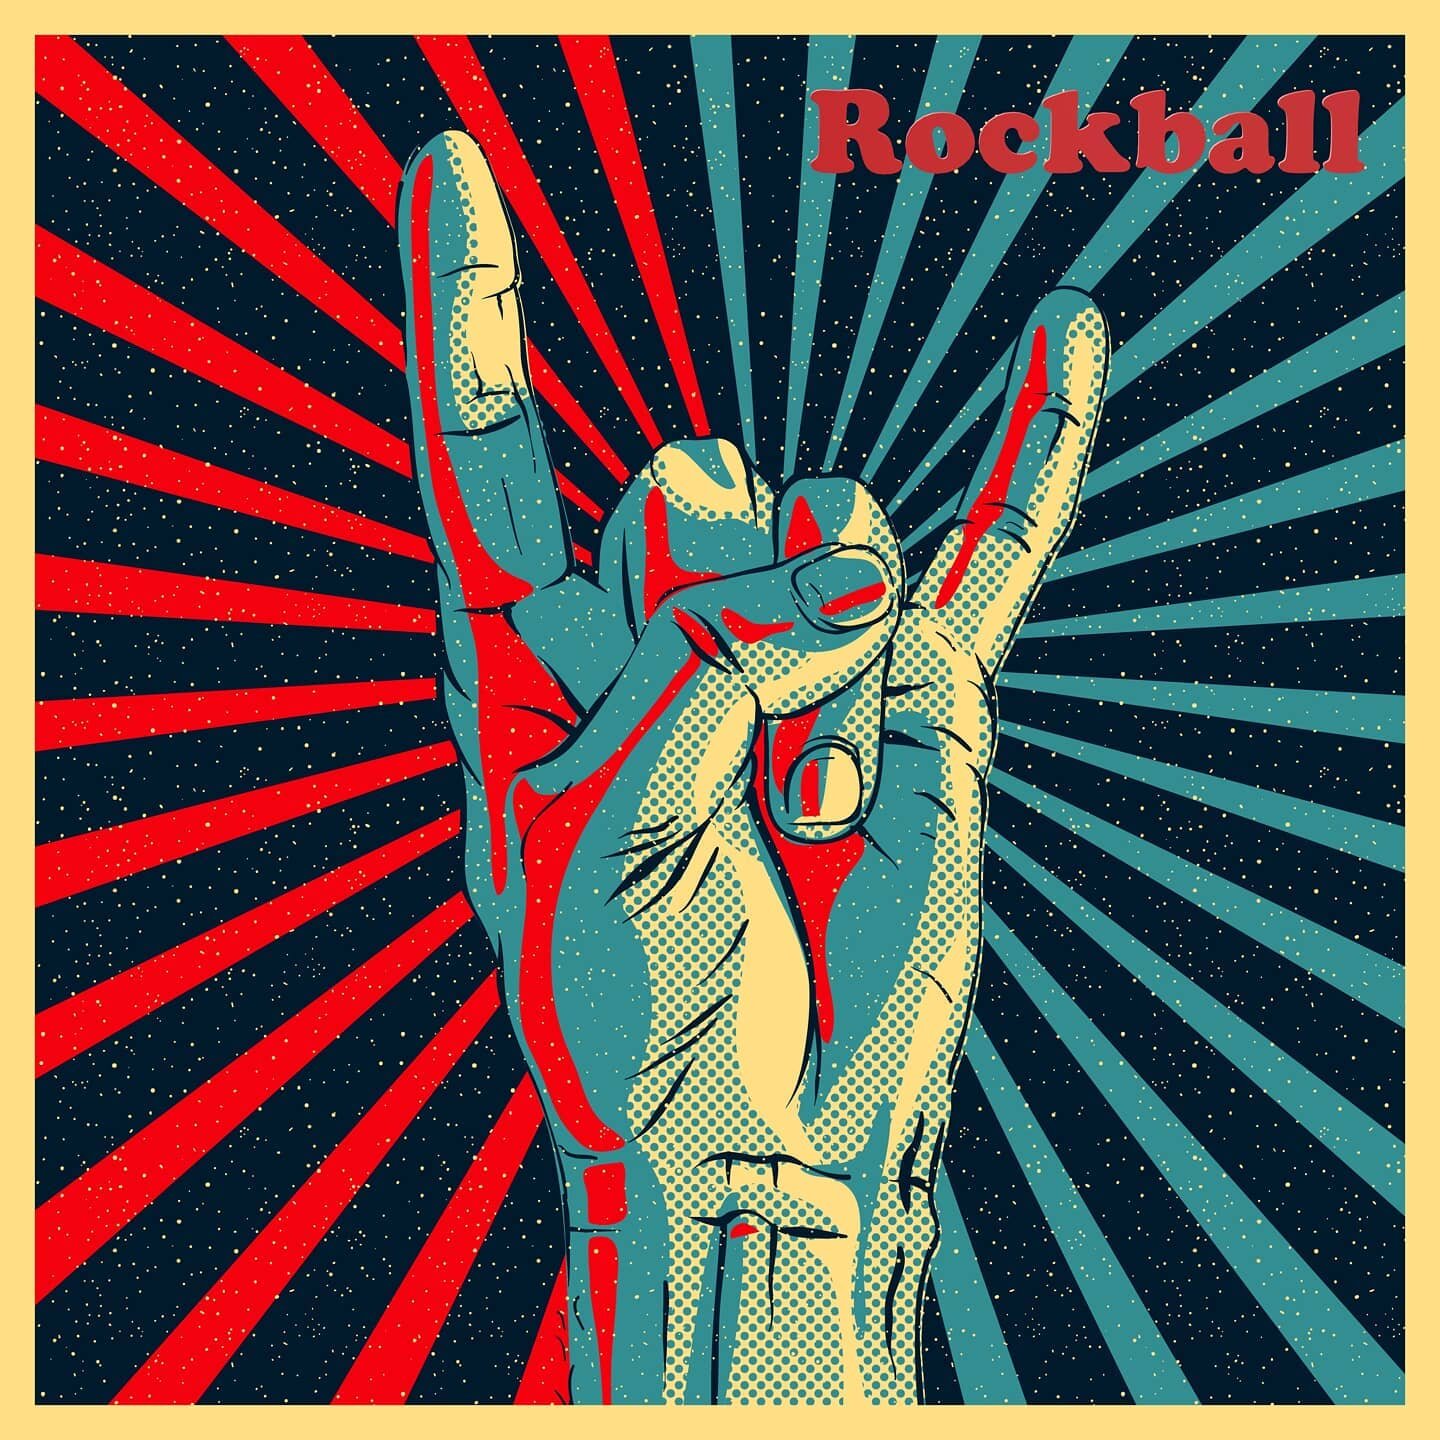 Rockball - Out Now! Get it on our site before it hits the stores next week and tell your friends you got it before them. Link in bio. #rockball #jimiandthestrangers #newmusic #rock #altrock #rockandroll #music #newsingle #newrelease #musicalert #newm